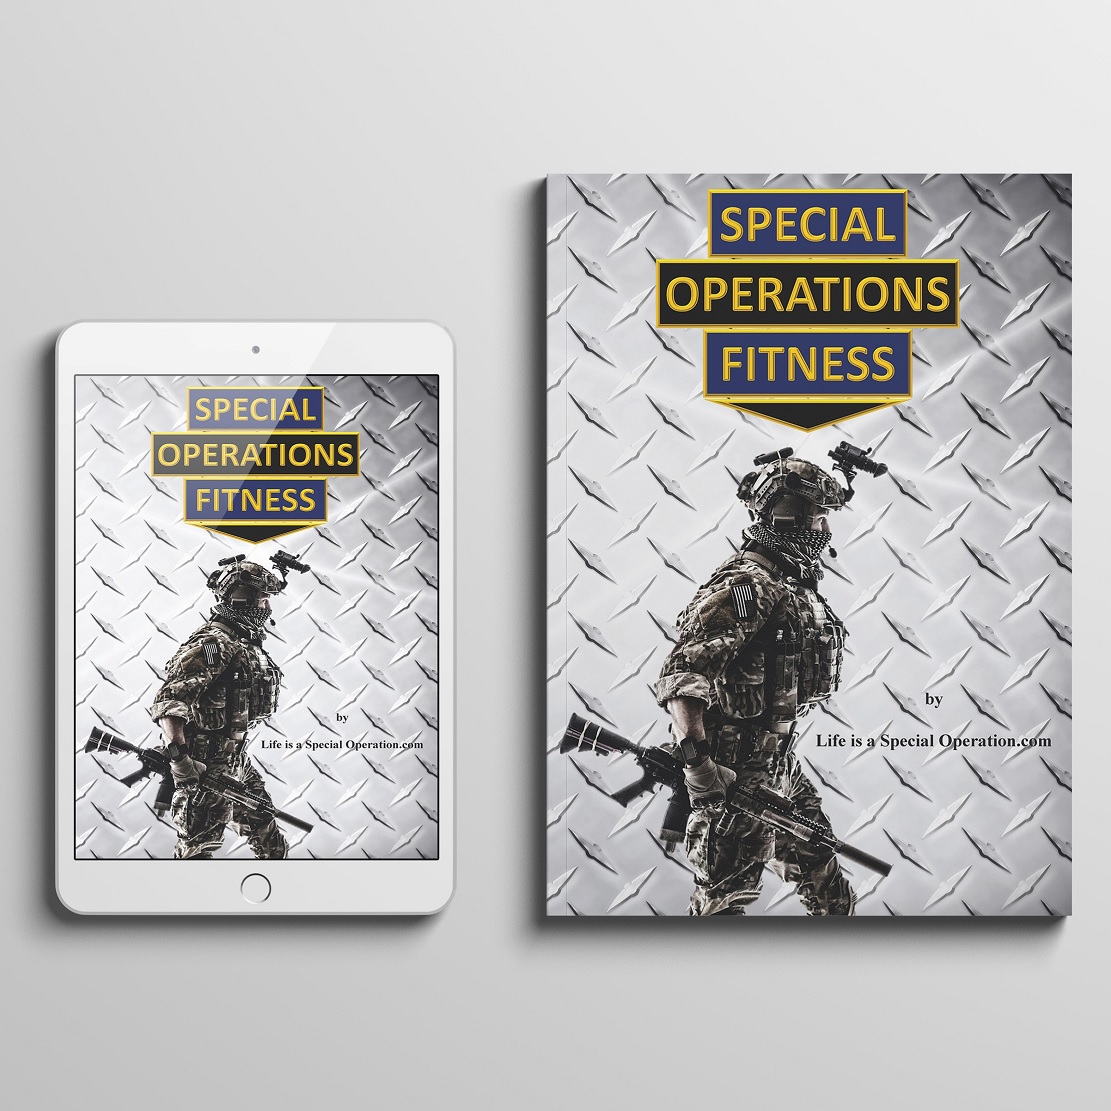 Check out our Fitness Programs & Books